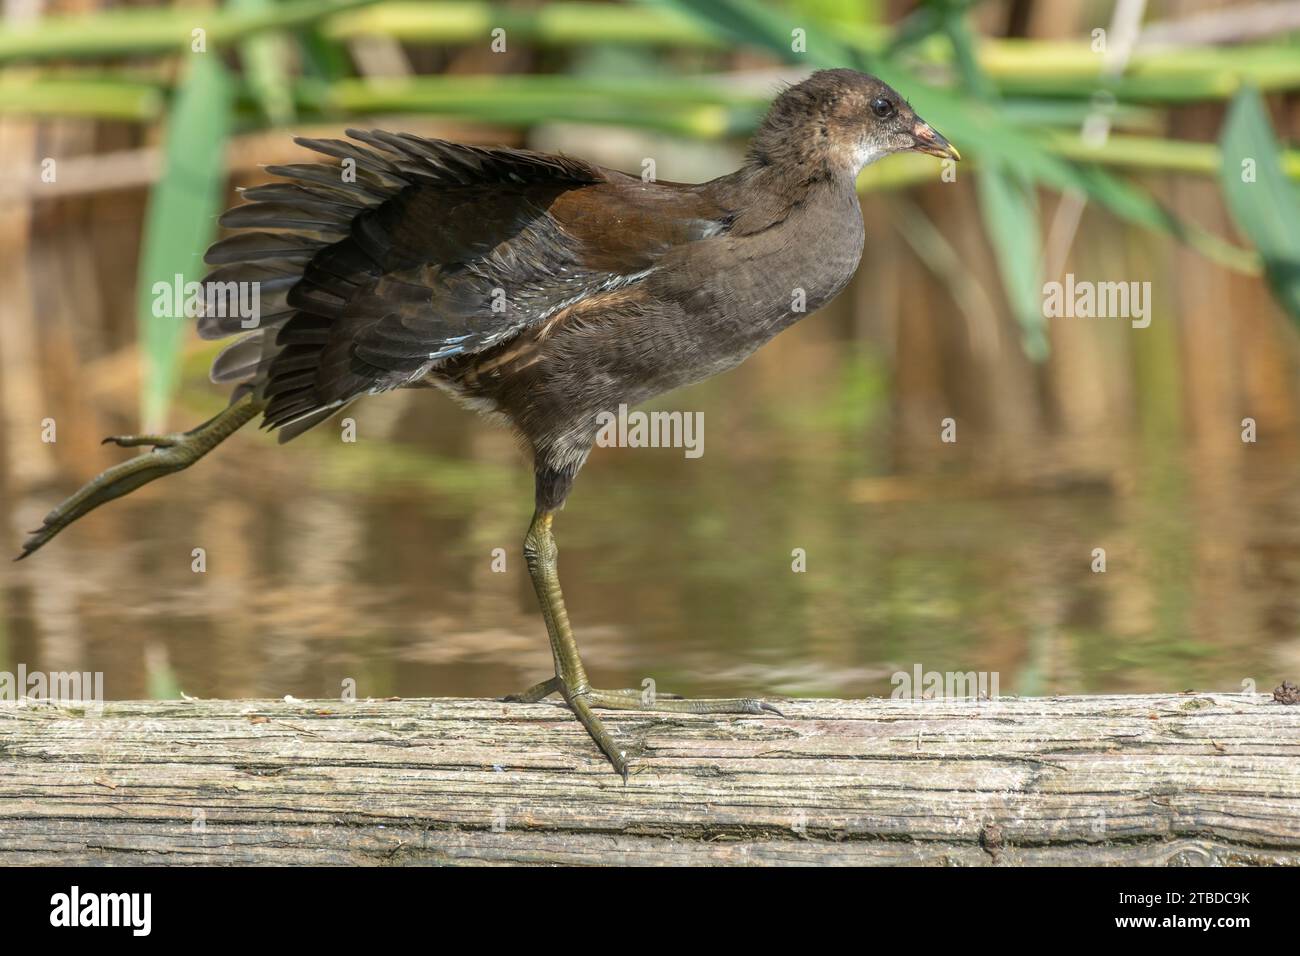 Young common moorhen (Gallinula chloropus) stretching its wings on a tree trunk in a river. Bas-Rhin, Alsace, Grand Est, France, Europe. Stock Photo